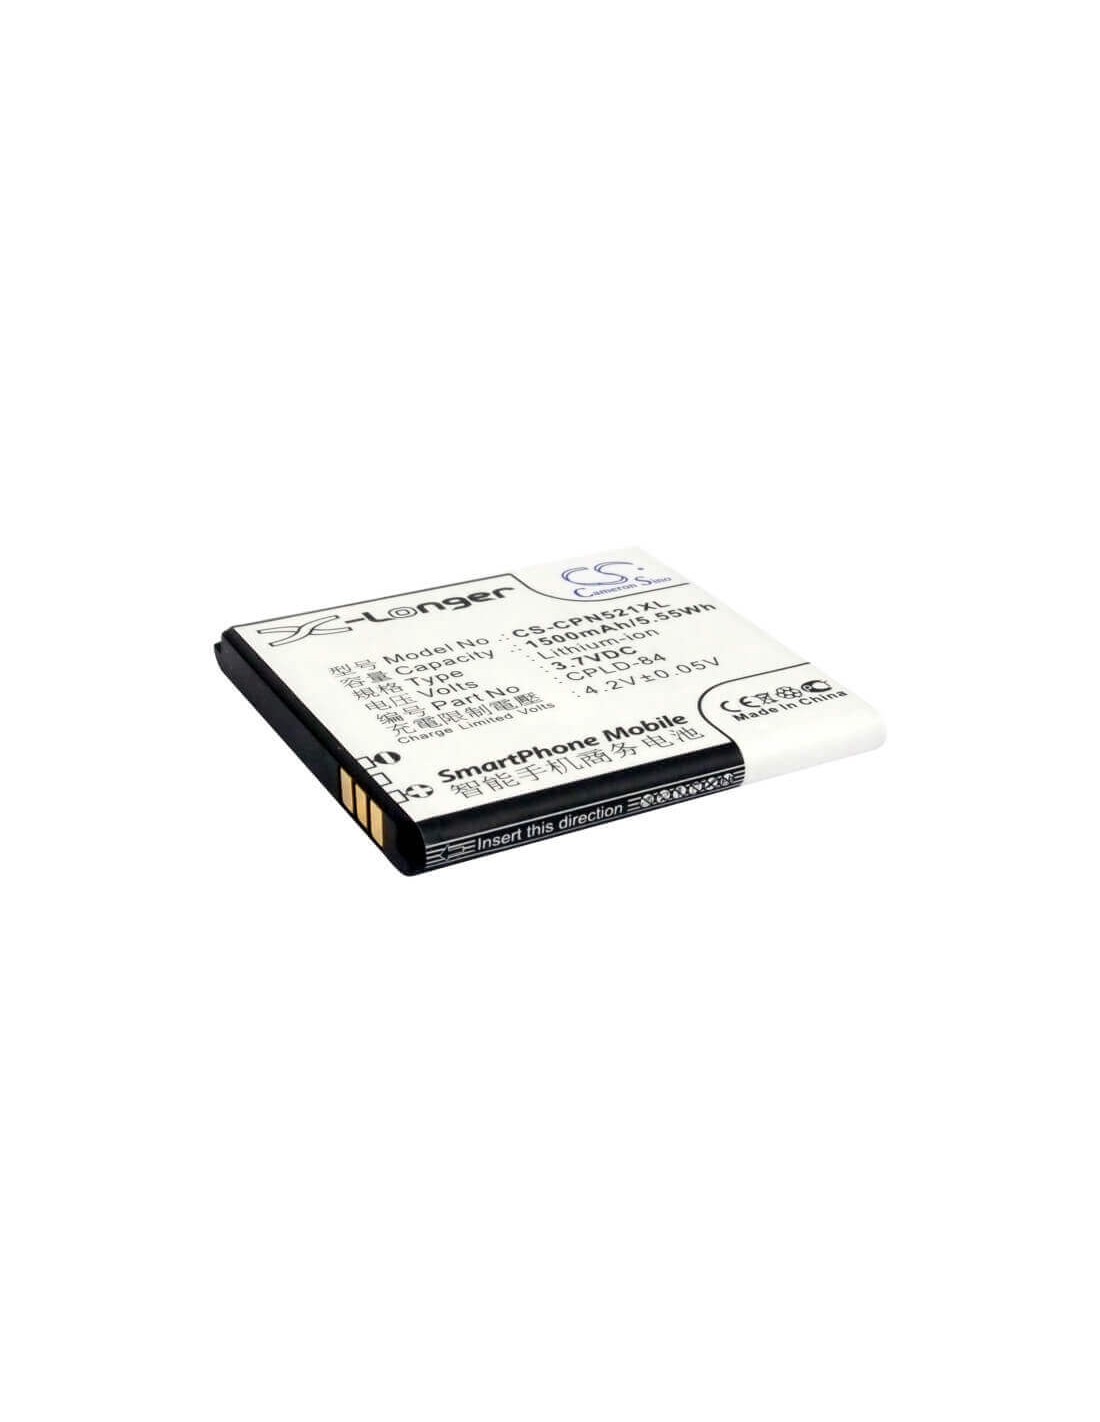 Battery for Coolpad 5210, 7235 3.7V, 1500mAh - 5.55Wh